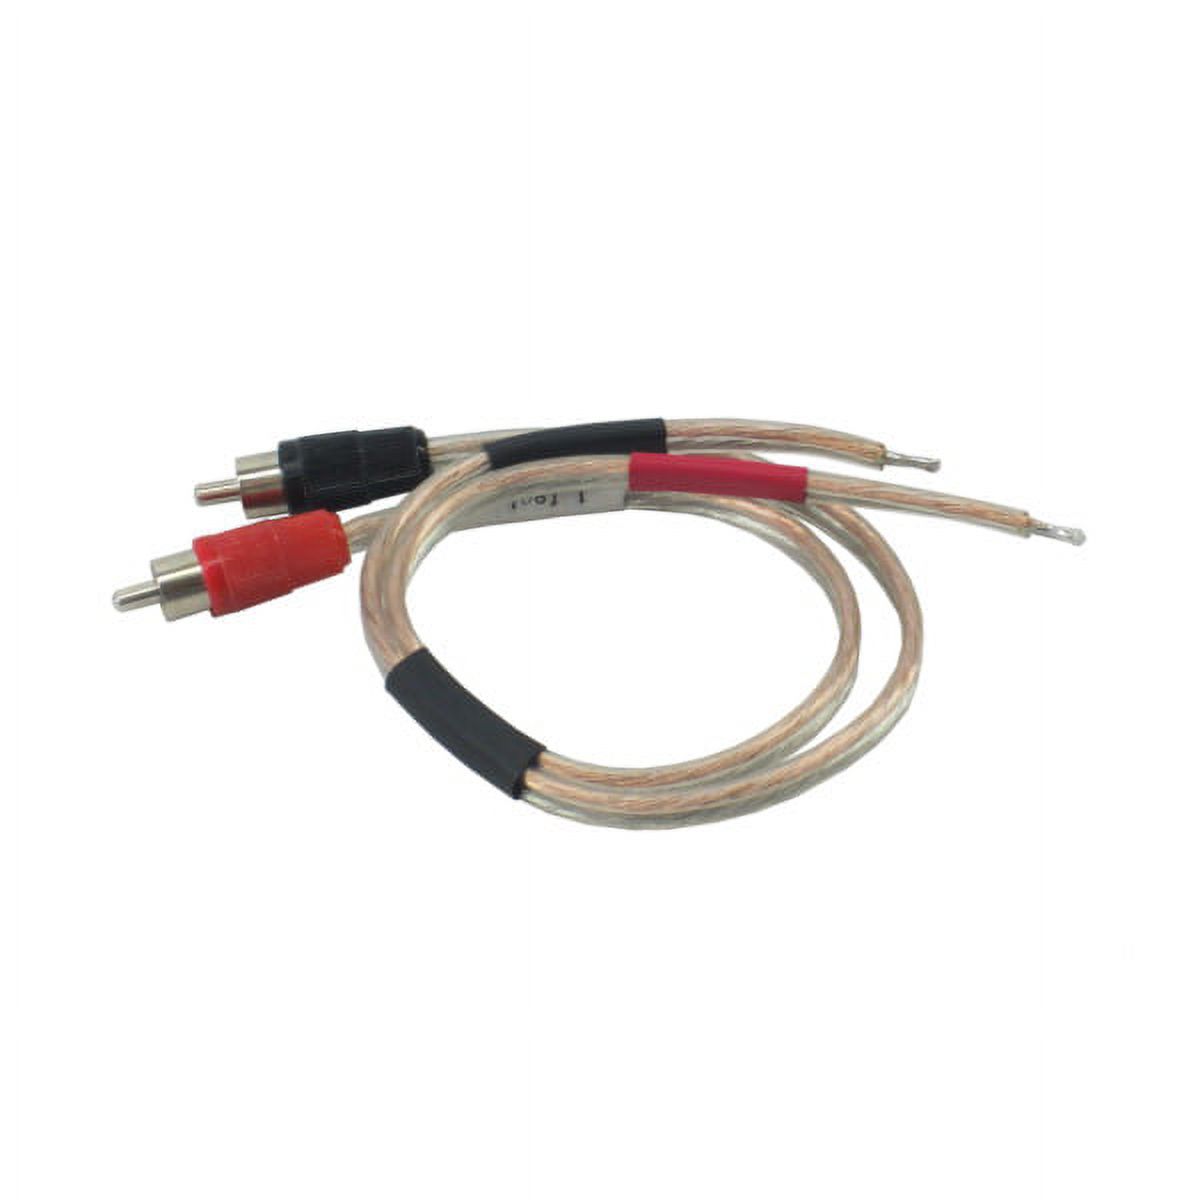 IEC L74224-01 18 AWG Speaker wire pair with RCA Males (Black & Red) 1' - image 1 of 4